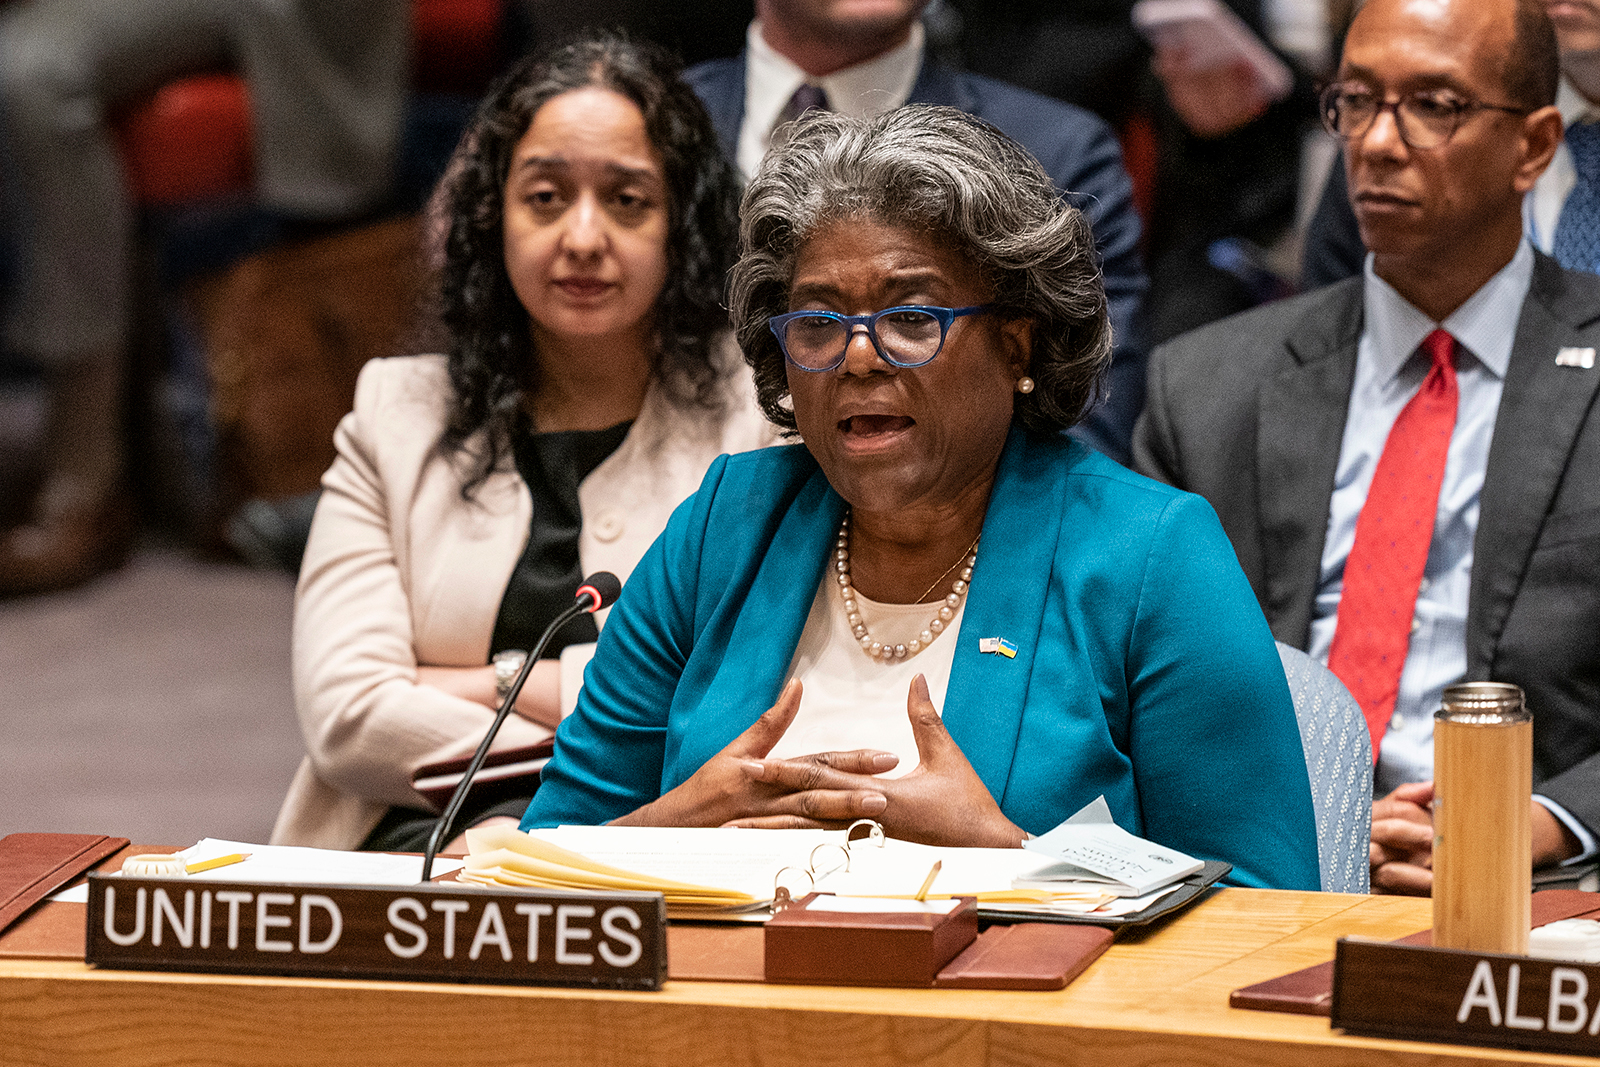 Linda Thomas-Greenfield speaks during the Security Council meeting on Maintenance of international peace and security at UN Headquarters in New York on April 24.